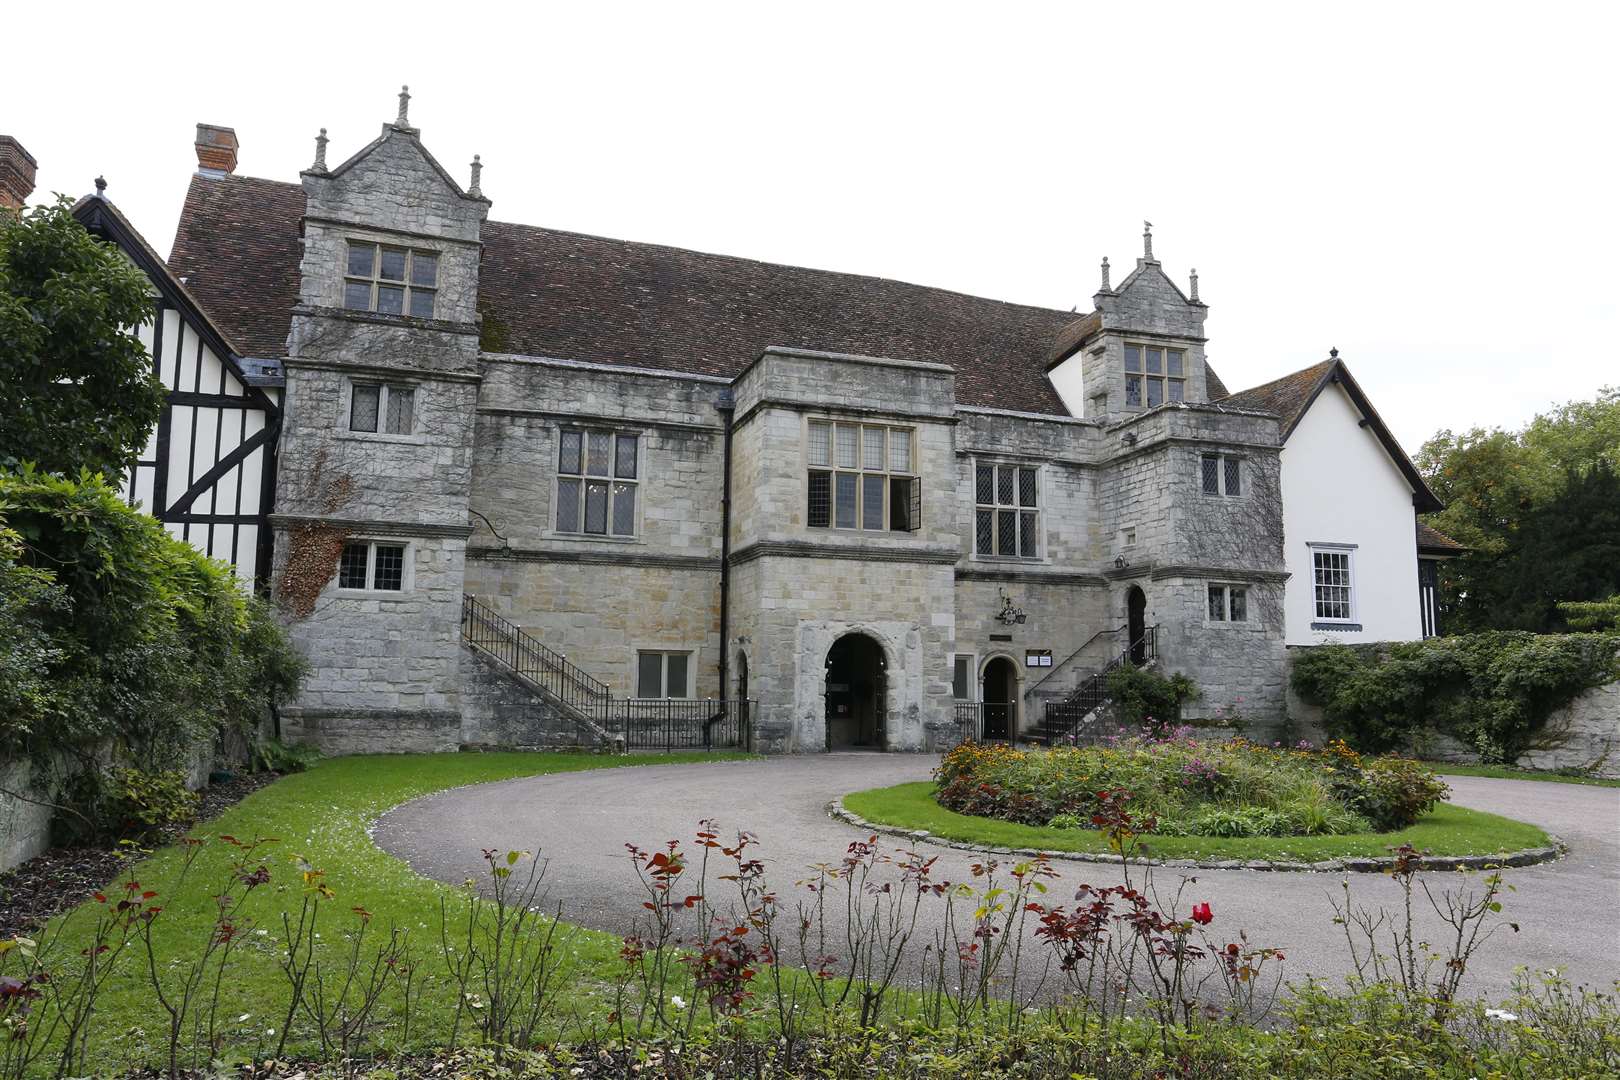 The inquest was held at the Archbishop’s Palace in Maidstone